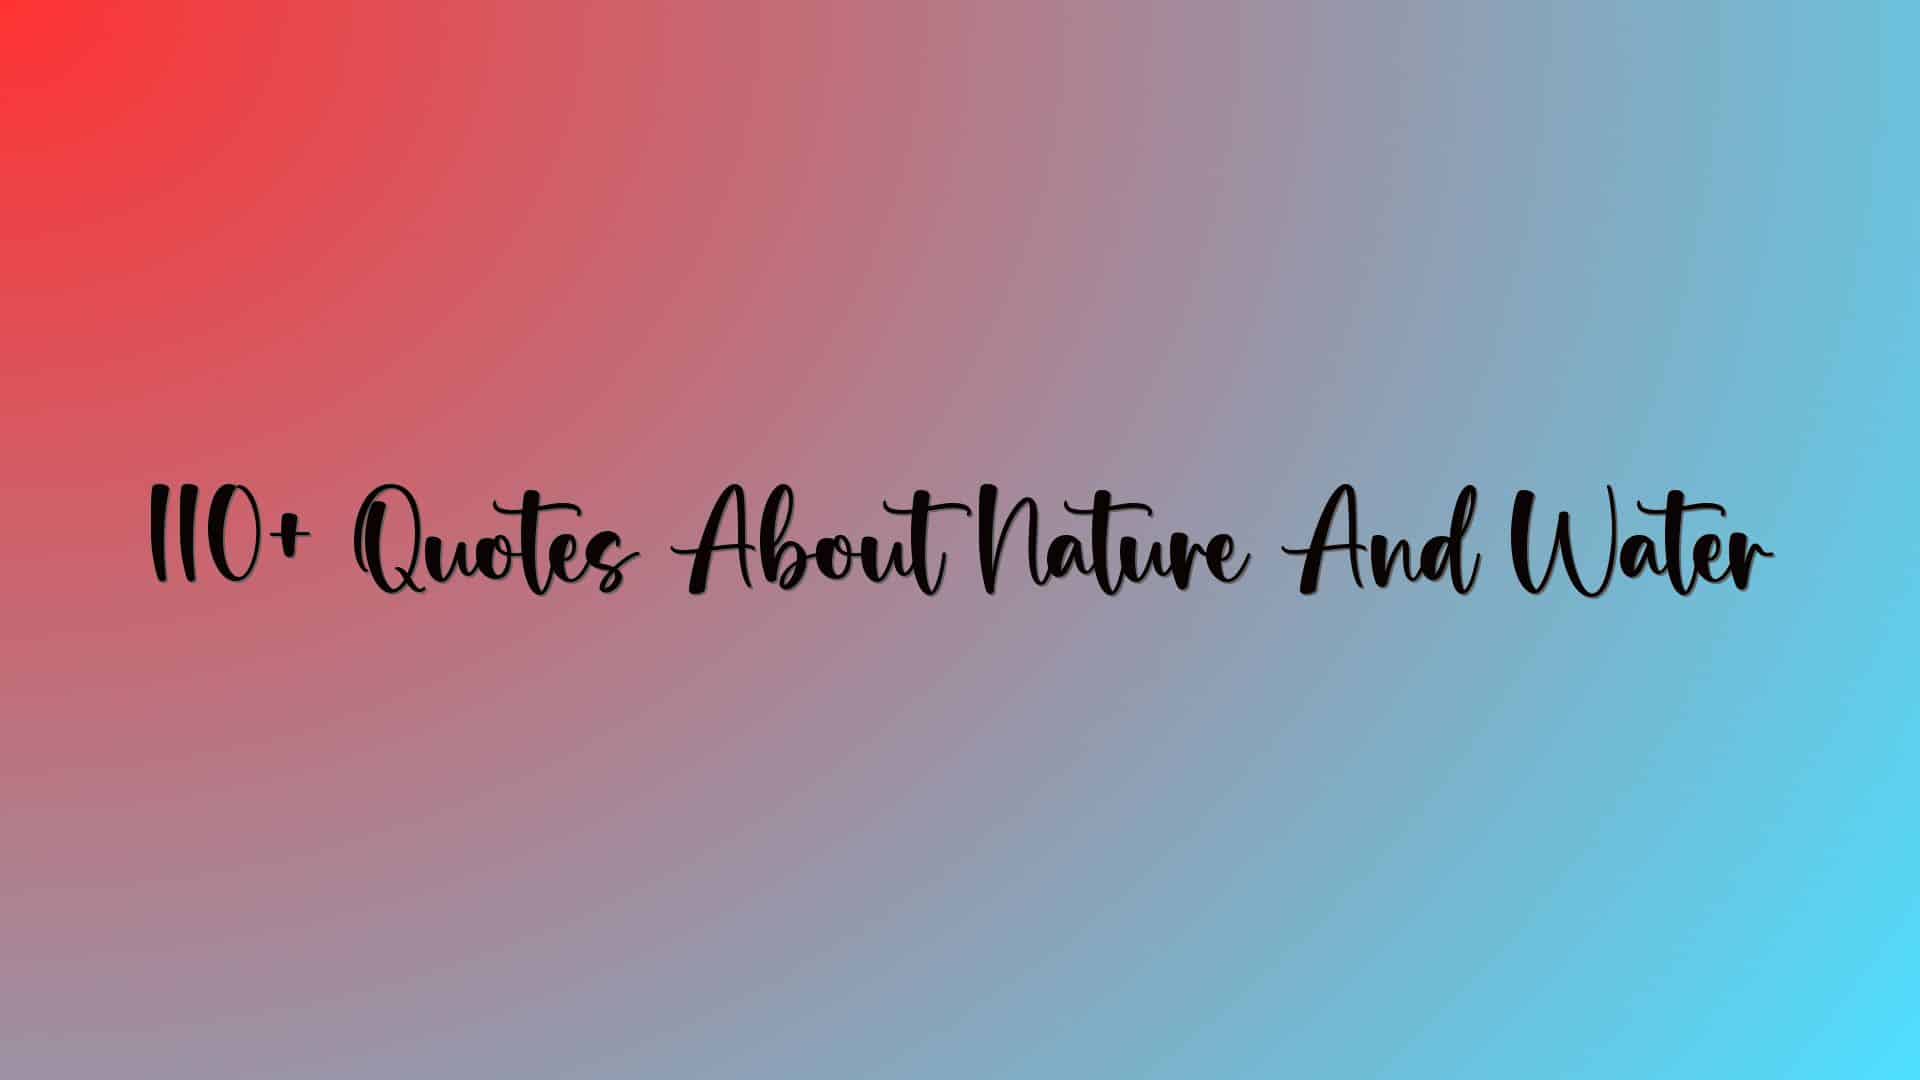 110+ Quotes About Nature And Water